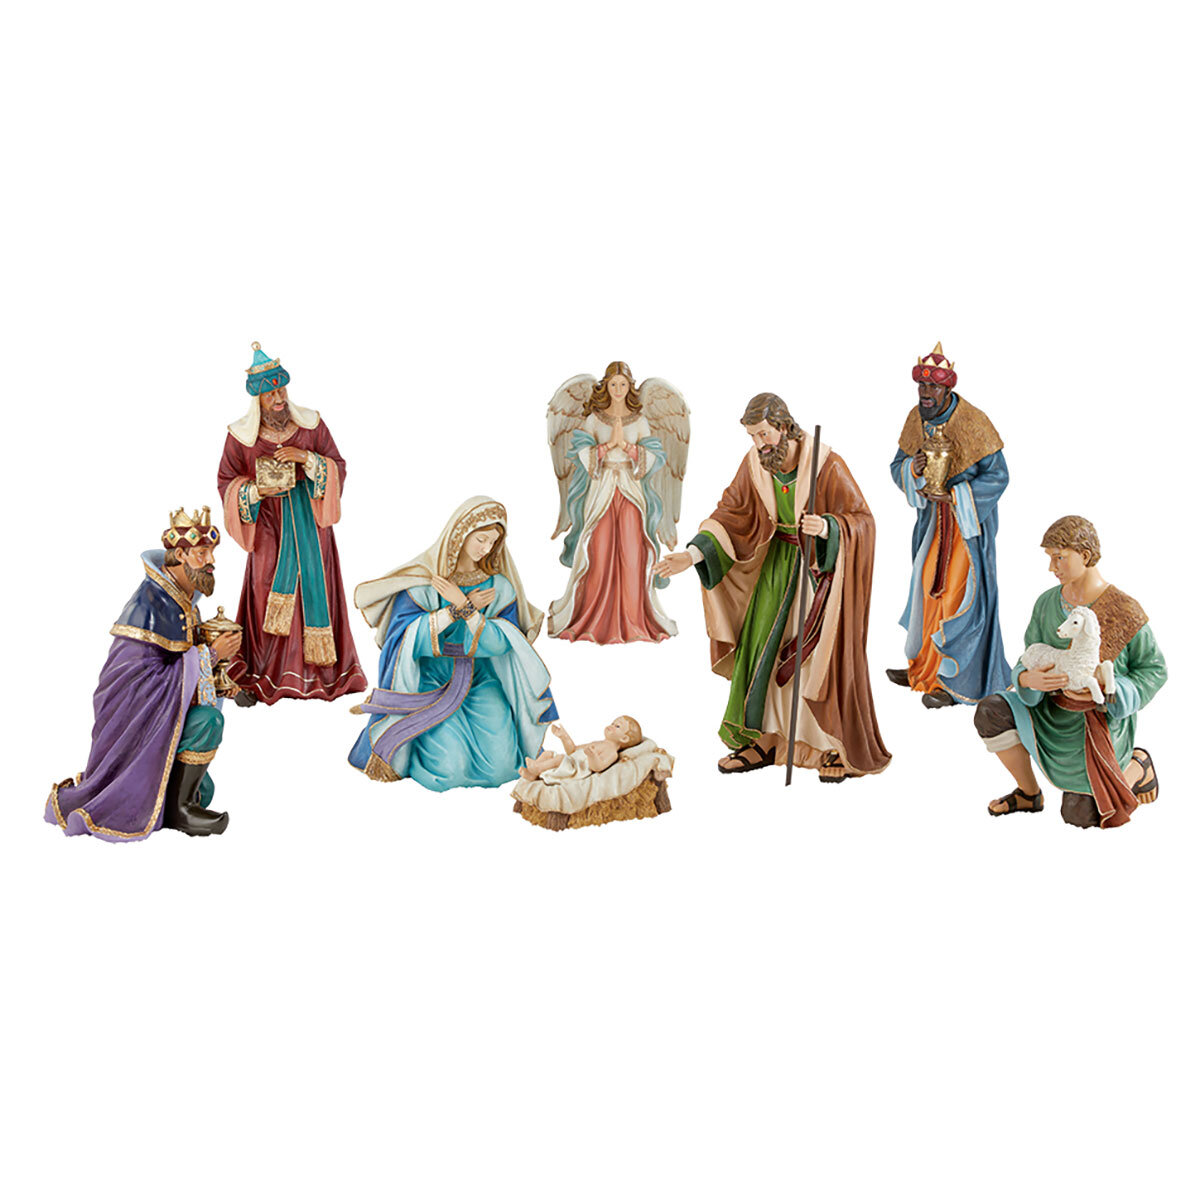 Buy 40in Outdoor Nativity Set Overview Image at Costco.co.uk